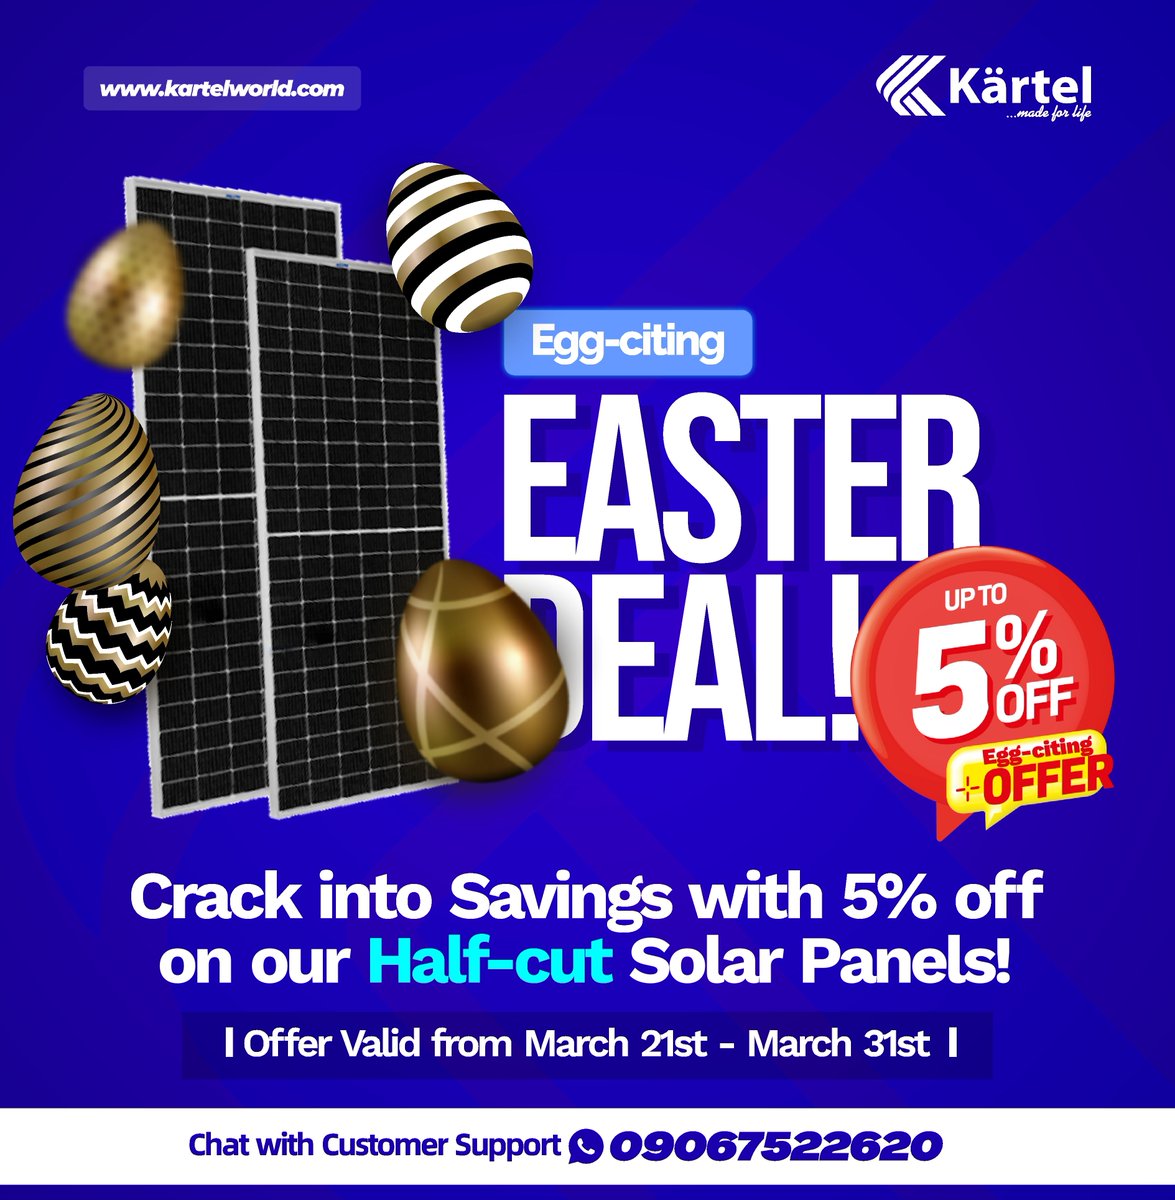 🐣 Egg-citing Easter Deal! 🌞 Get 5% OFF on our high-quality Half-cut solar panels! Offer valid from now till the 31st of March! Don’t miss out on this limited-time offer. Place your orders now!!! #EasterDeal #SolarSavings #RenewableEnergy #EasterSale